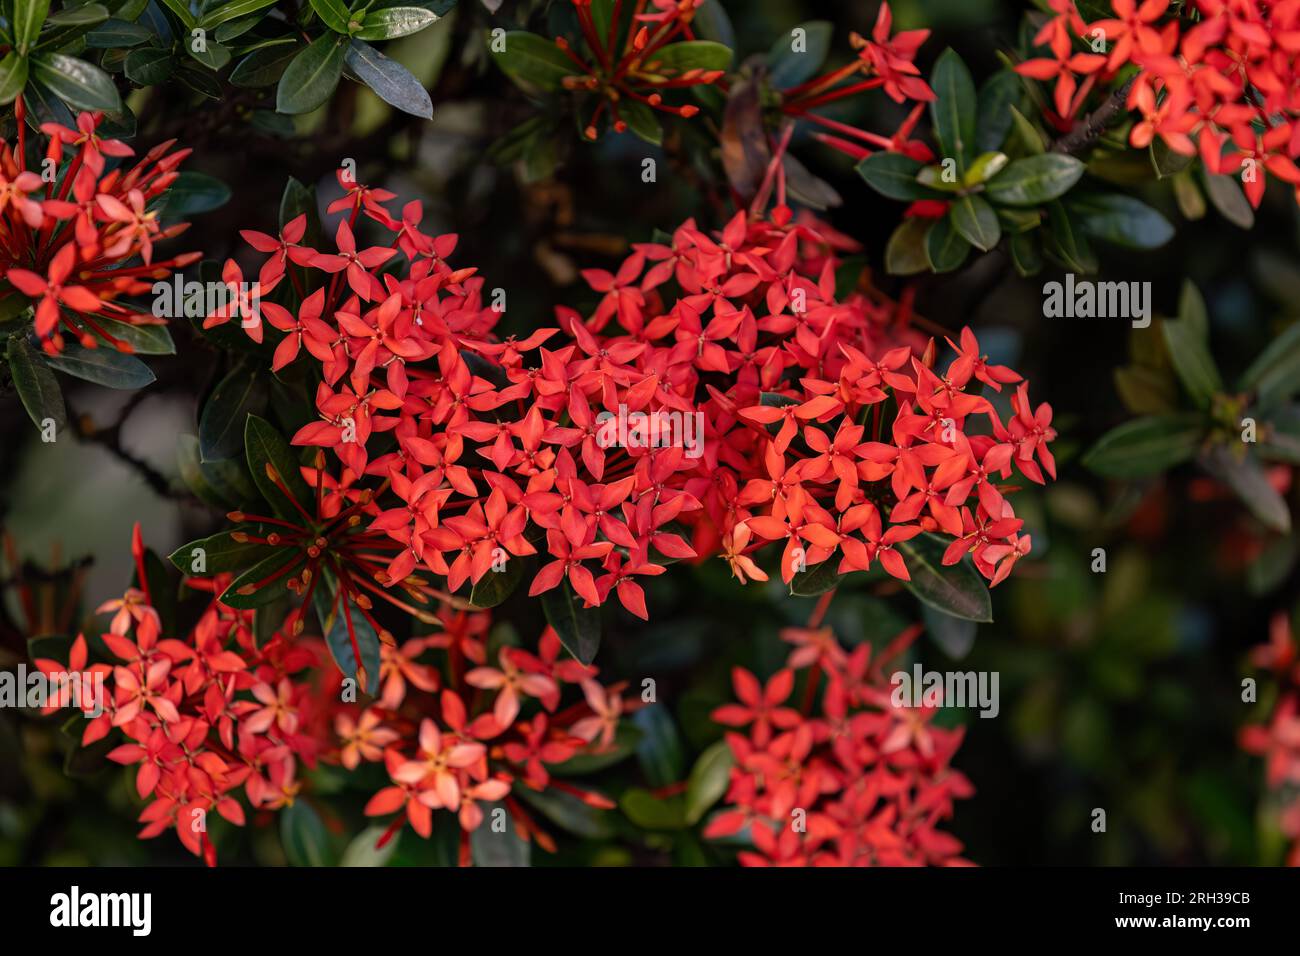 Red Jungle Flame Plant Flower of the genus Ixora Stock Photo